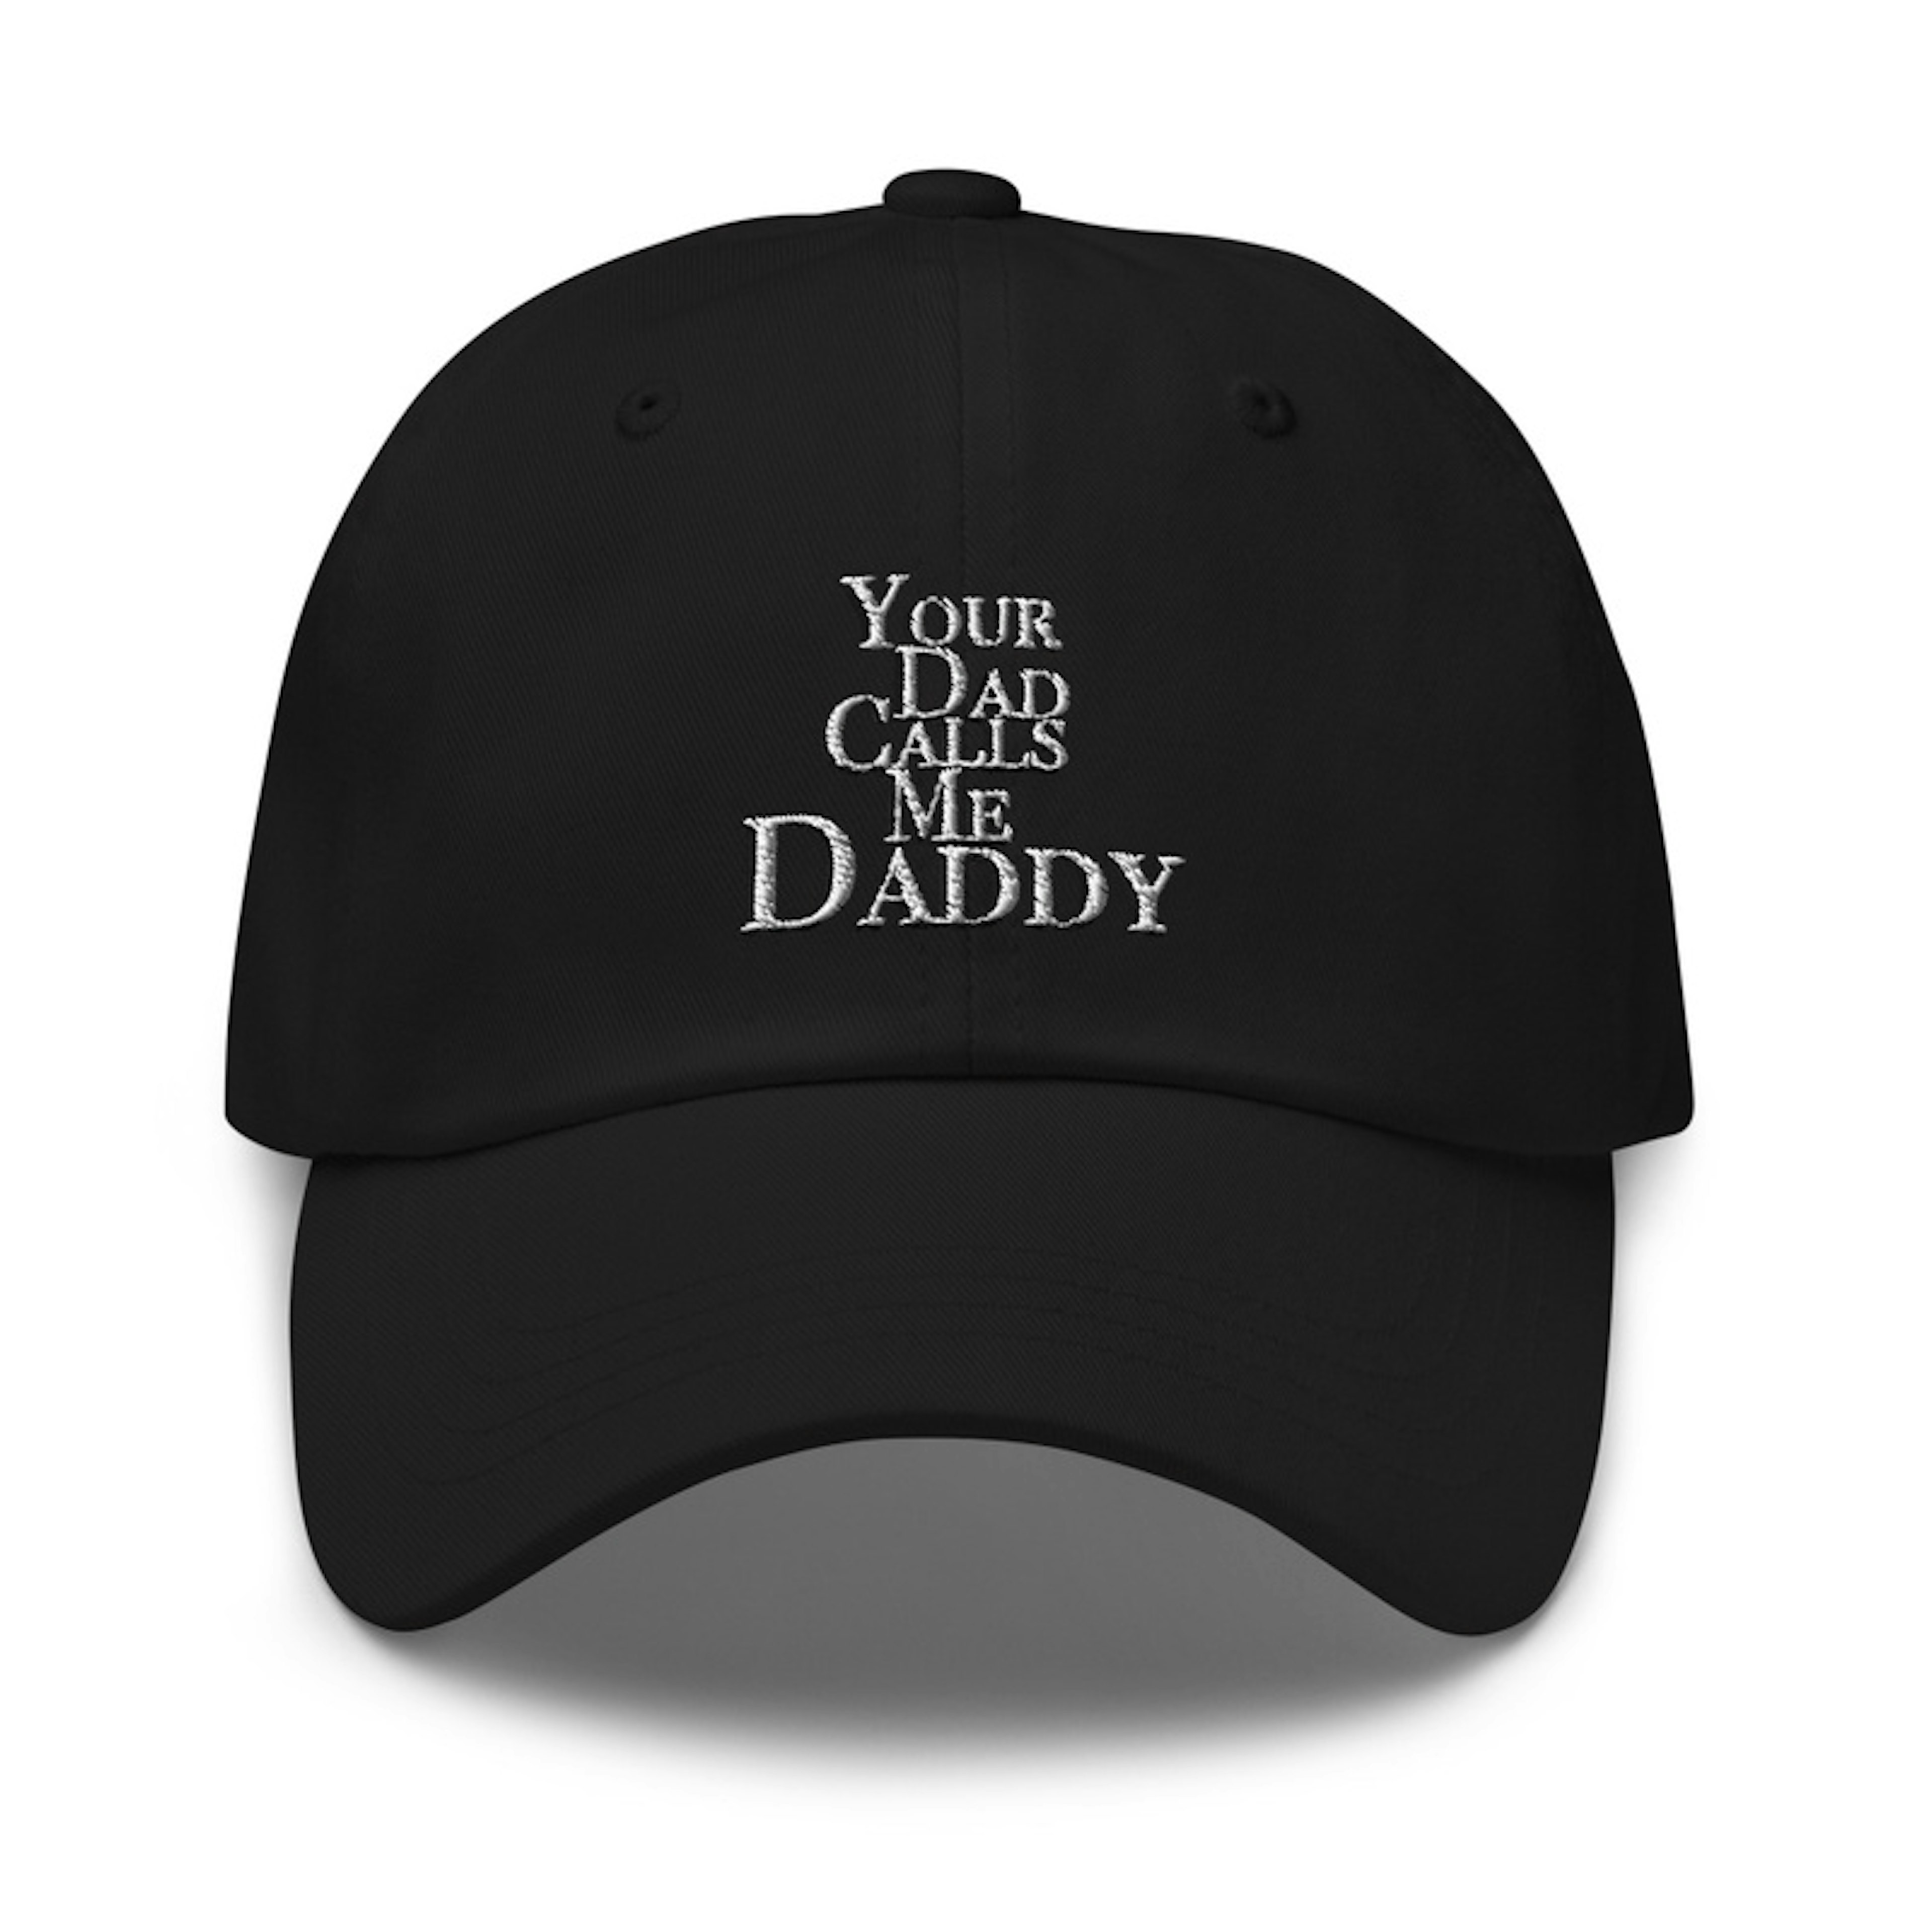 Your Dad Calls Me Daddy